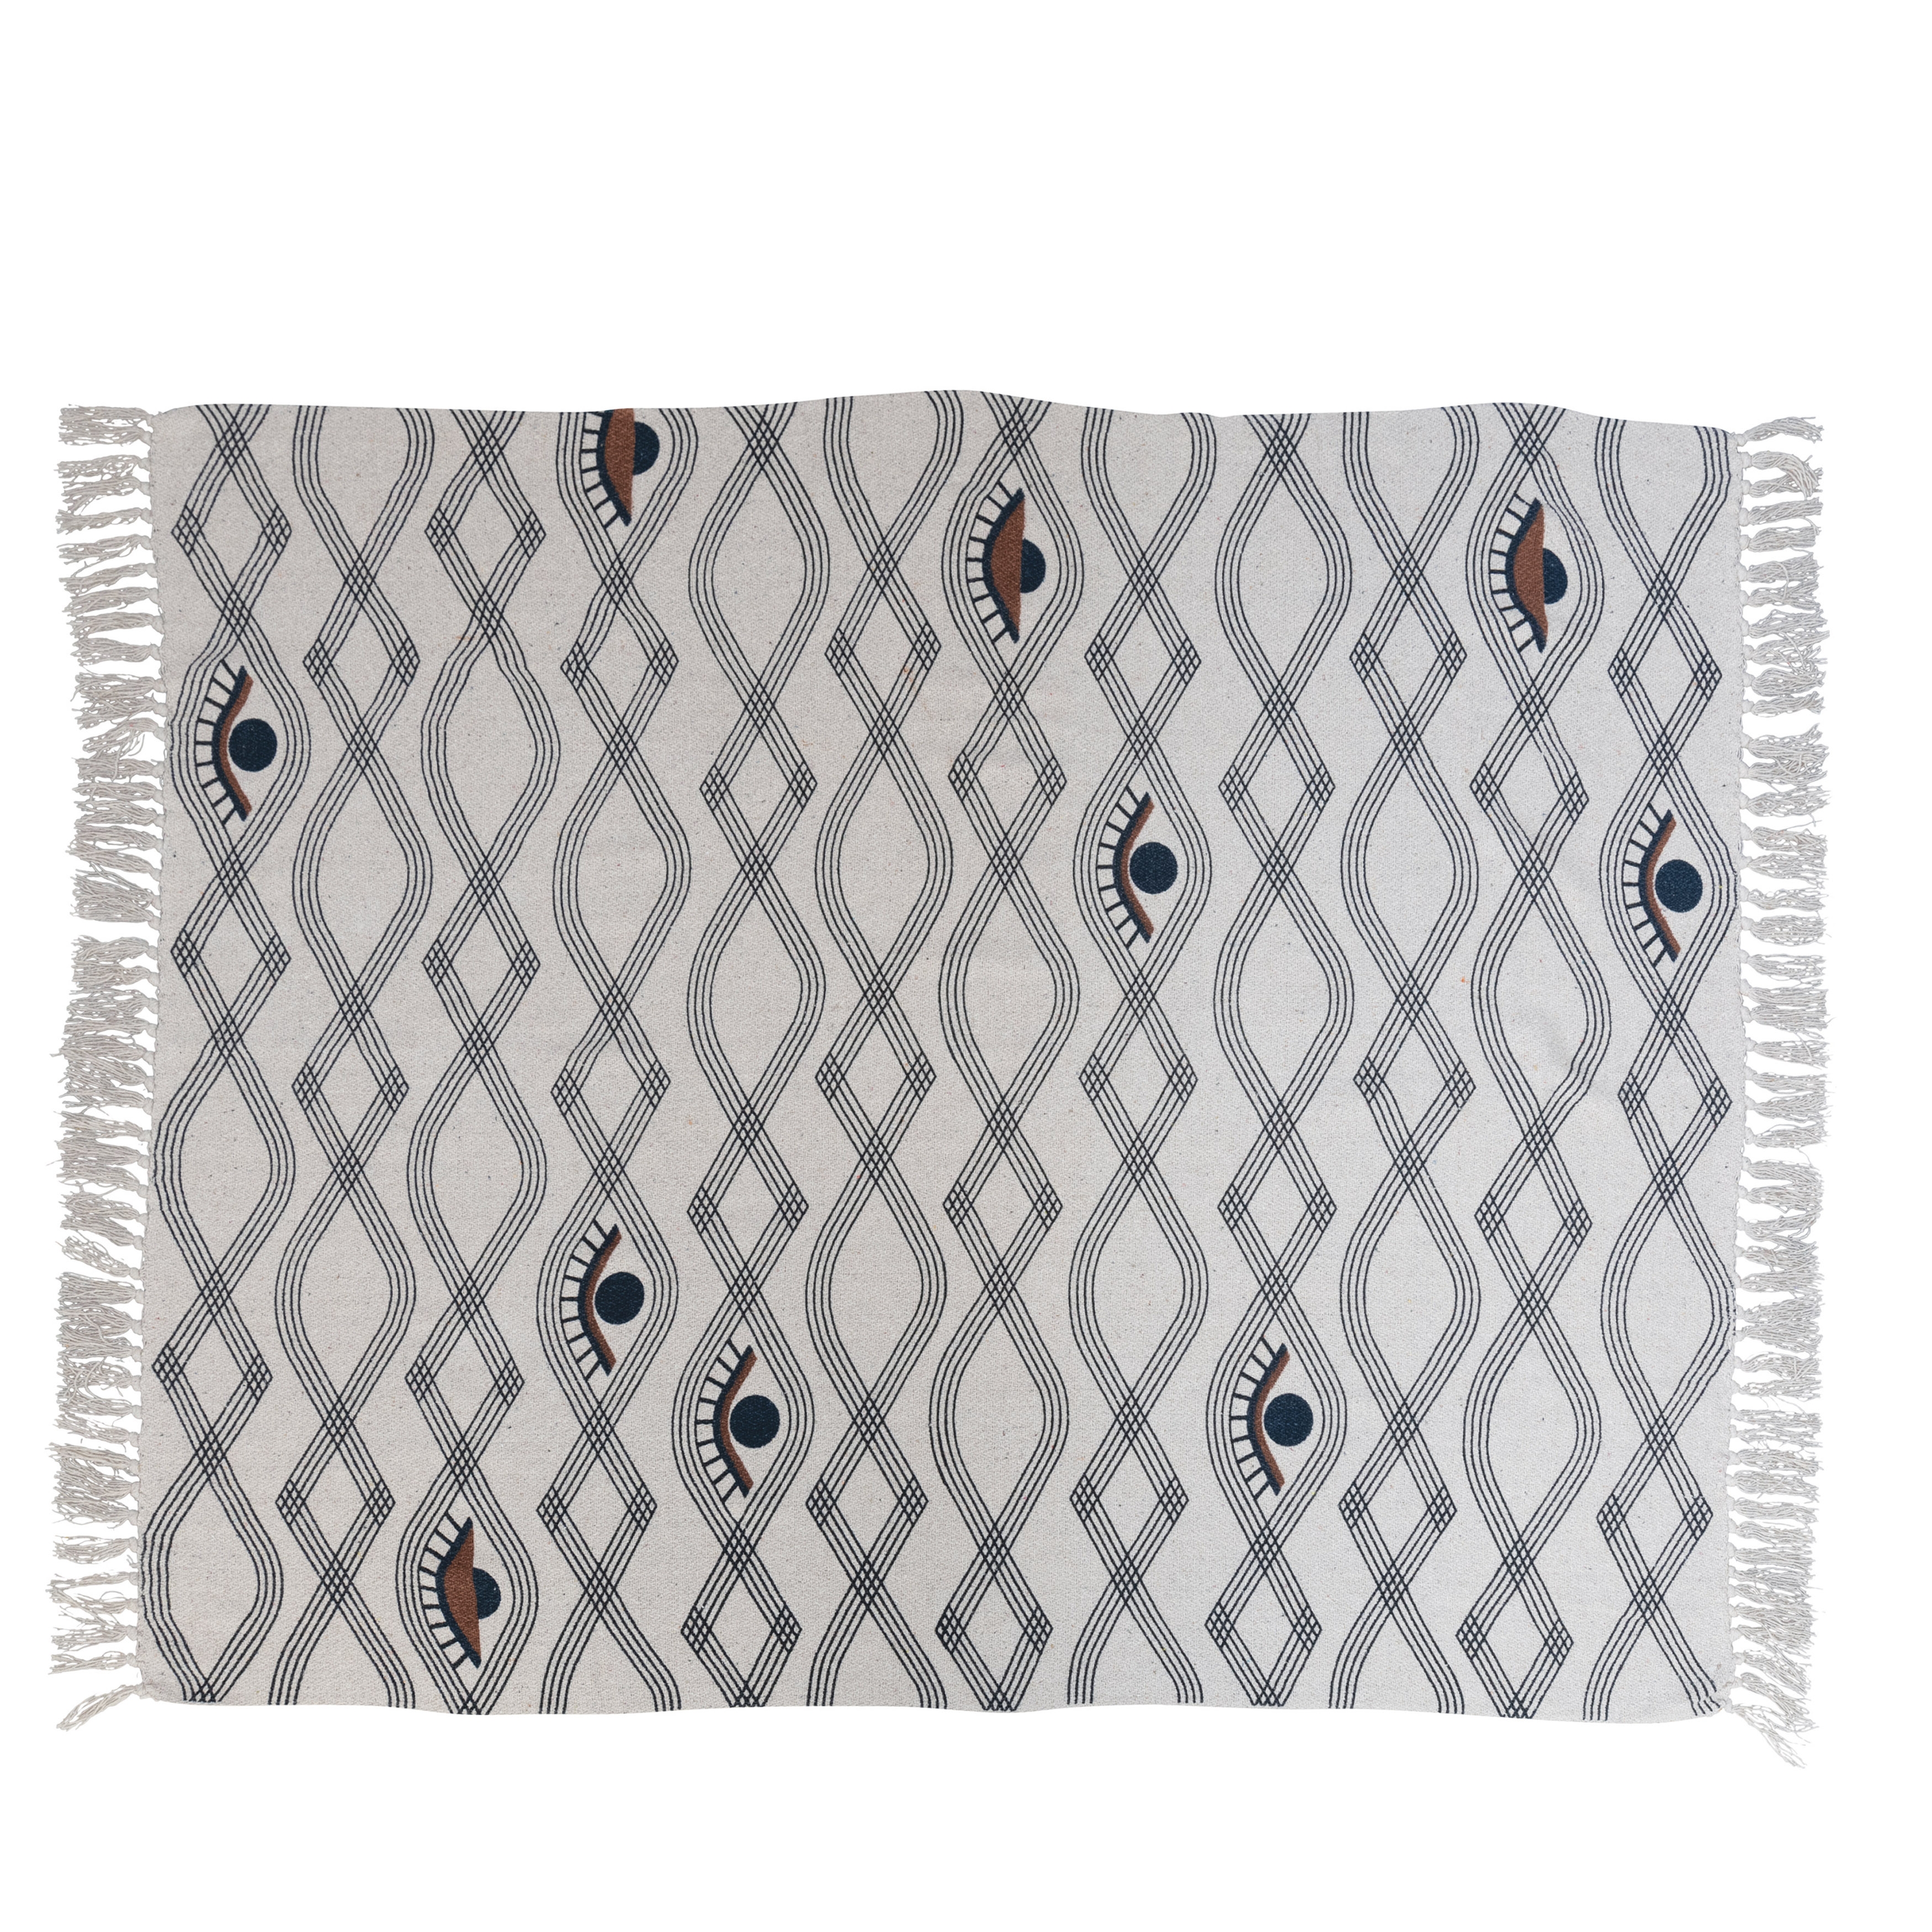  Recycled Cotton Blend Printed Throw Blanket with Eye Pattern and Fringe, Cream and Brown - Image 0